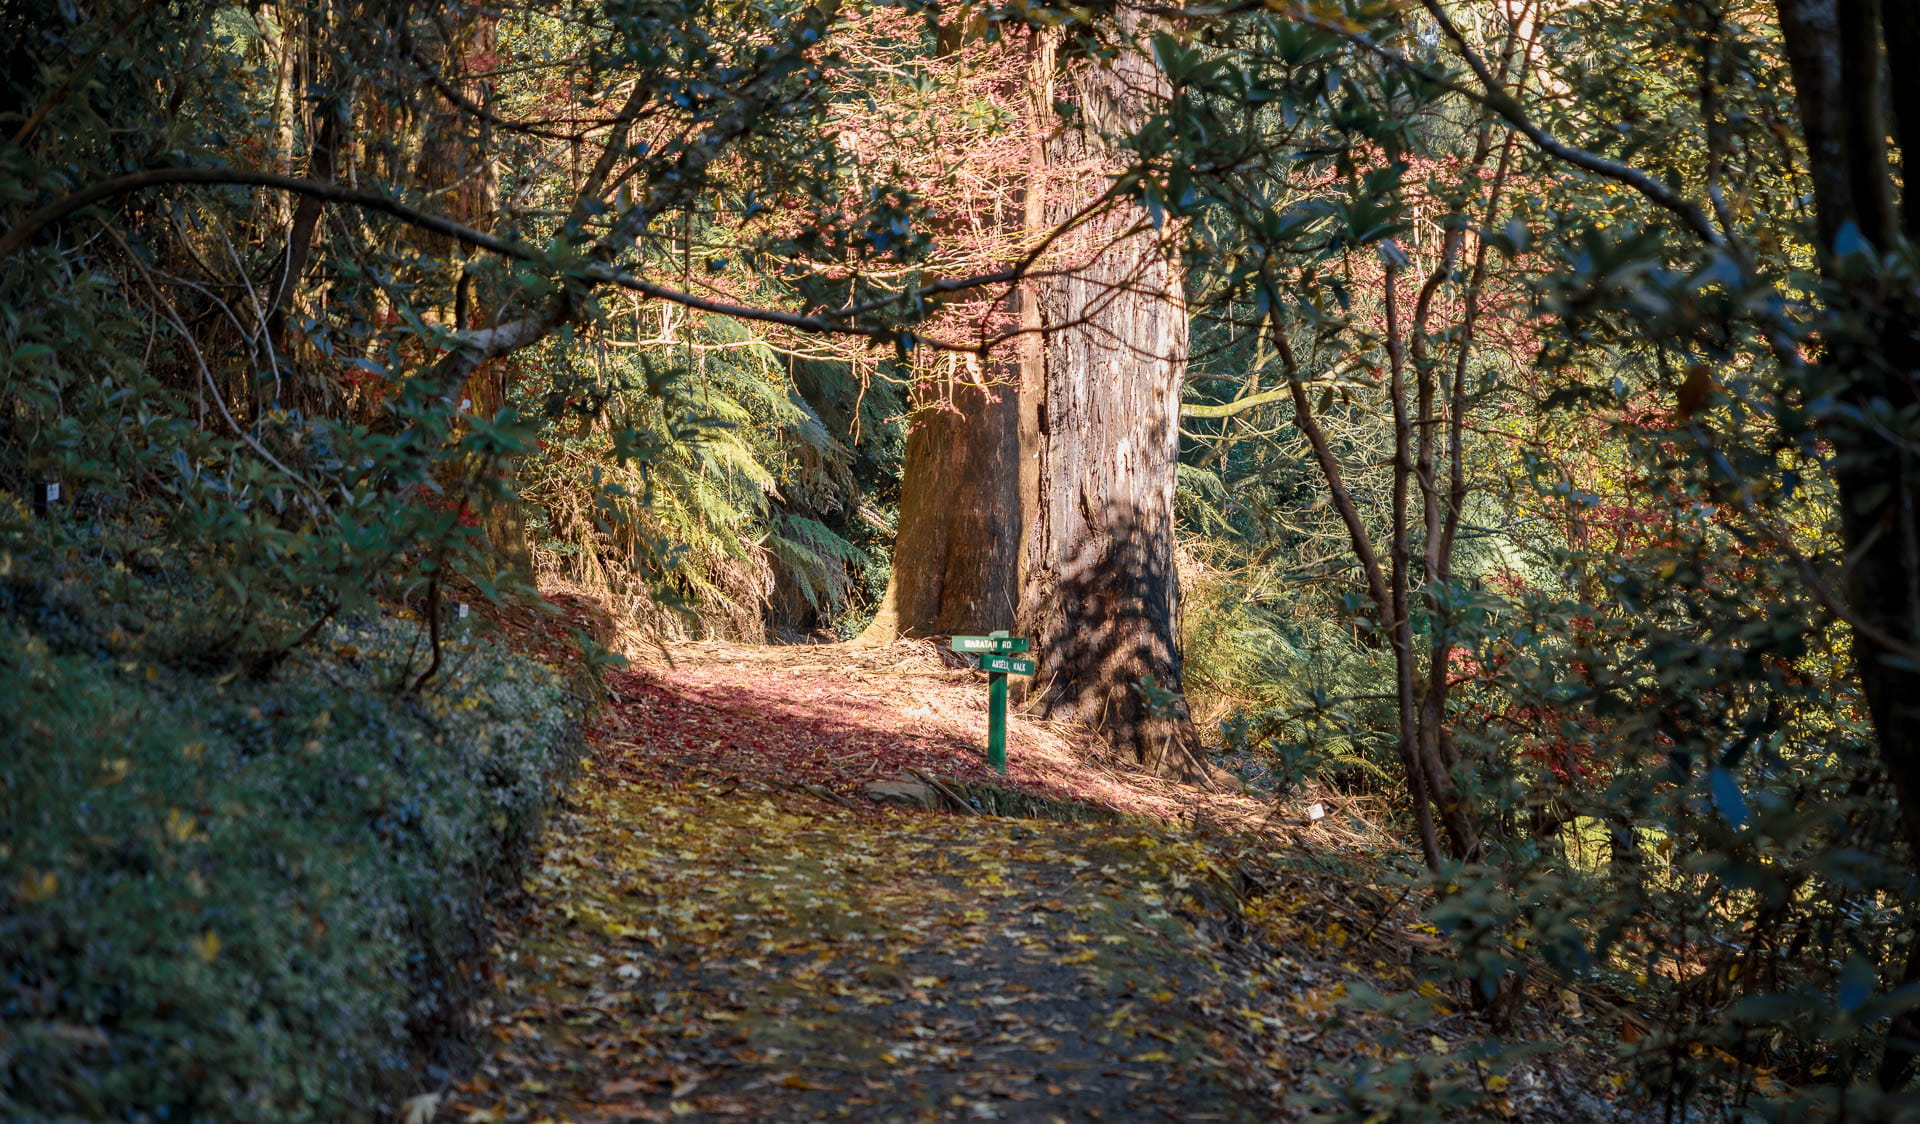 A garden path forks in two directions surrounded by autumn-coloured trees.